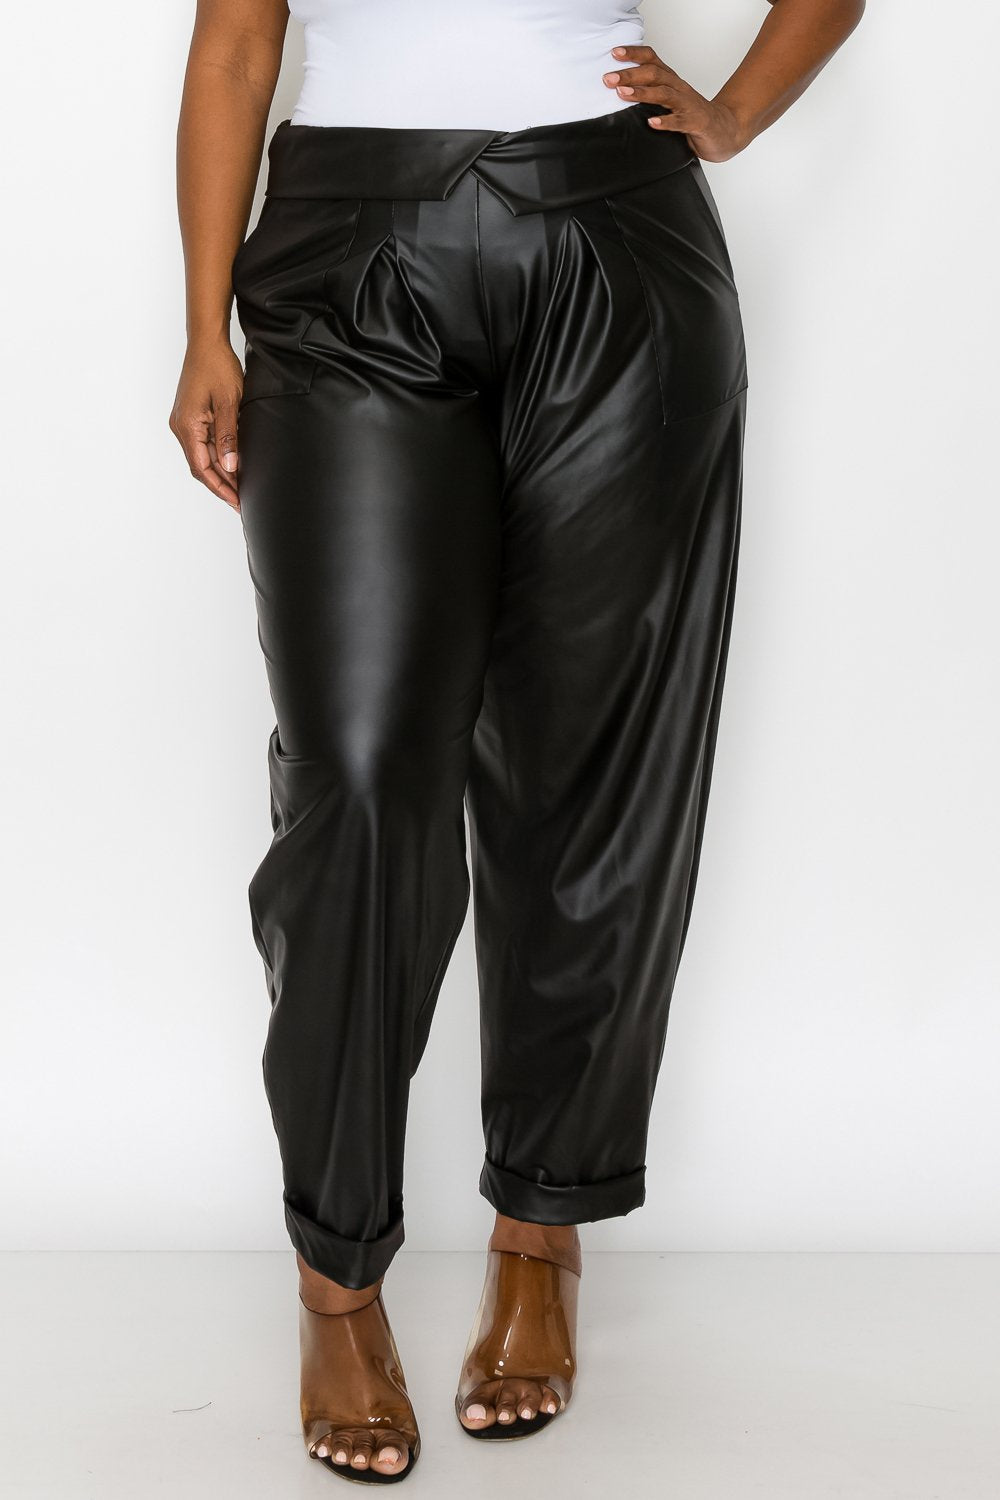 livd L I V D women's trendy plus size fashion made in USA contemporary collared faux leather pants pu with large outside pockets and folded ankle cuff in black 